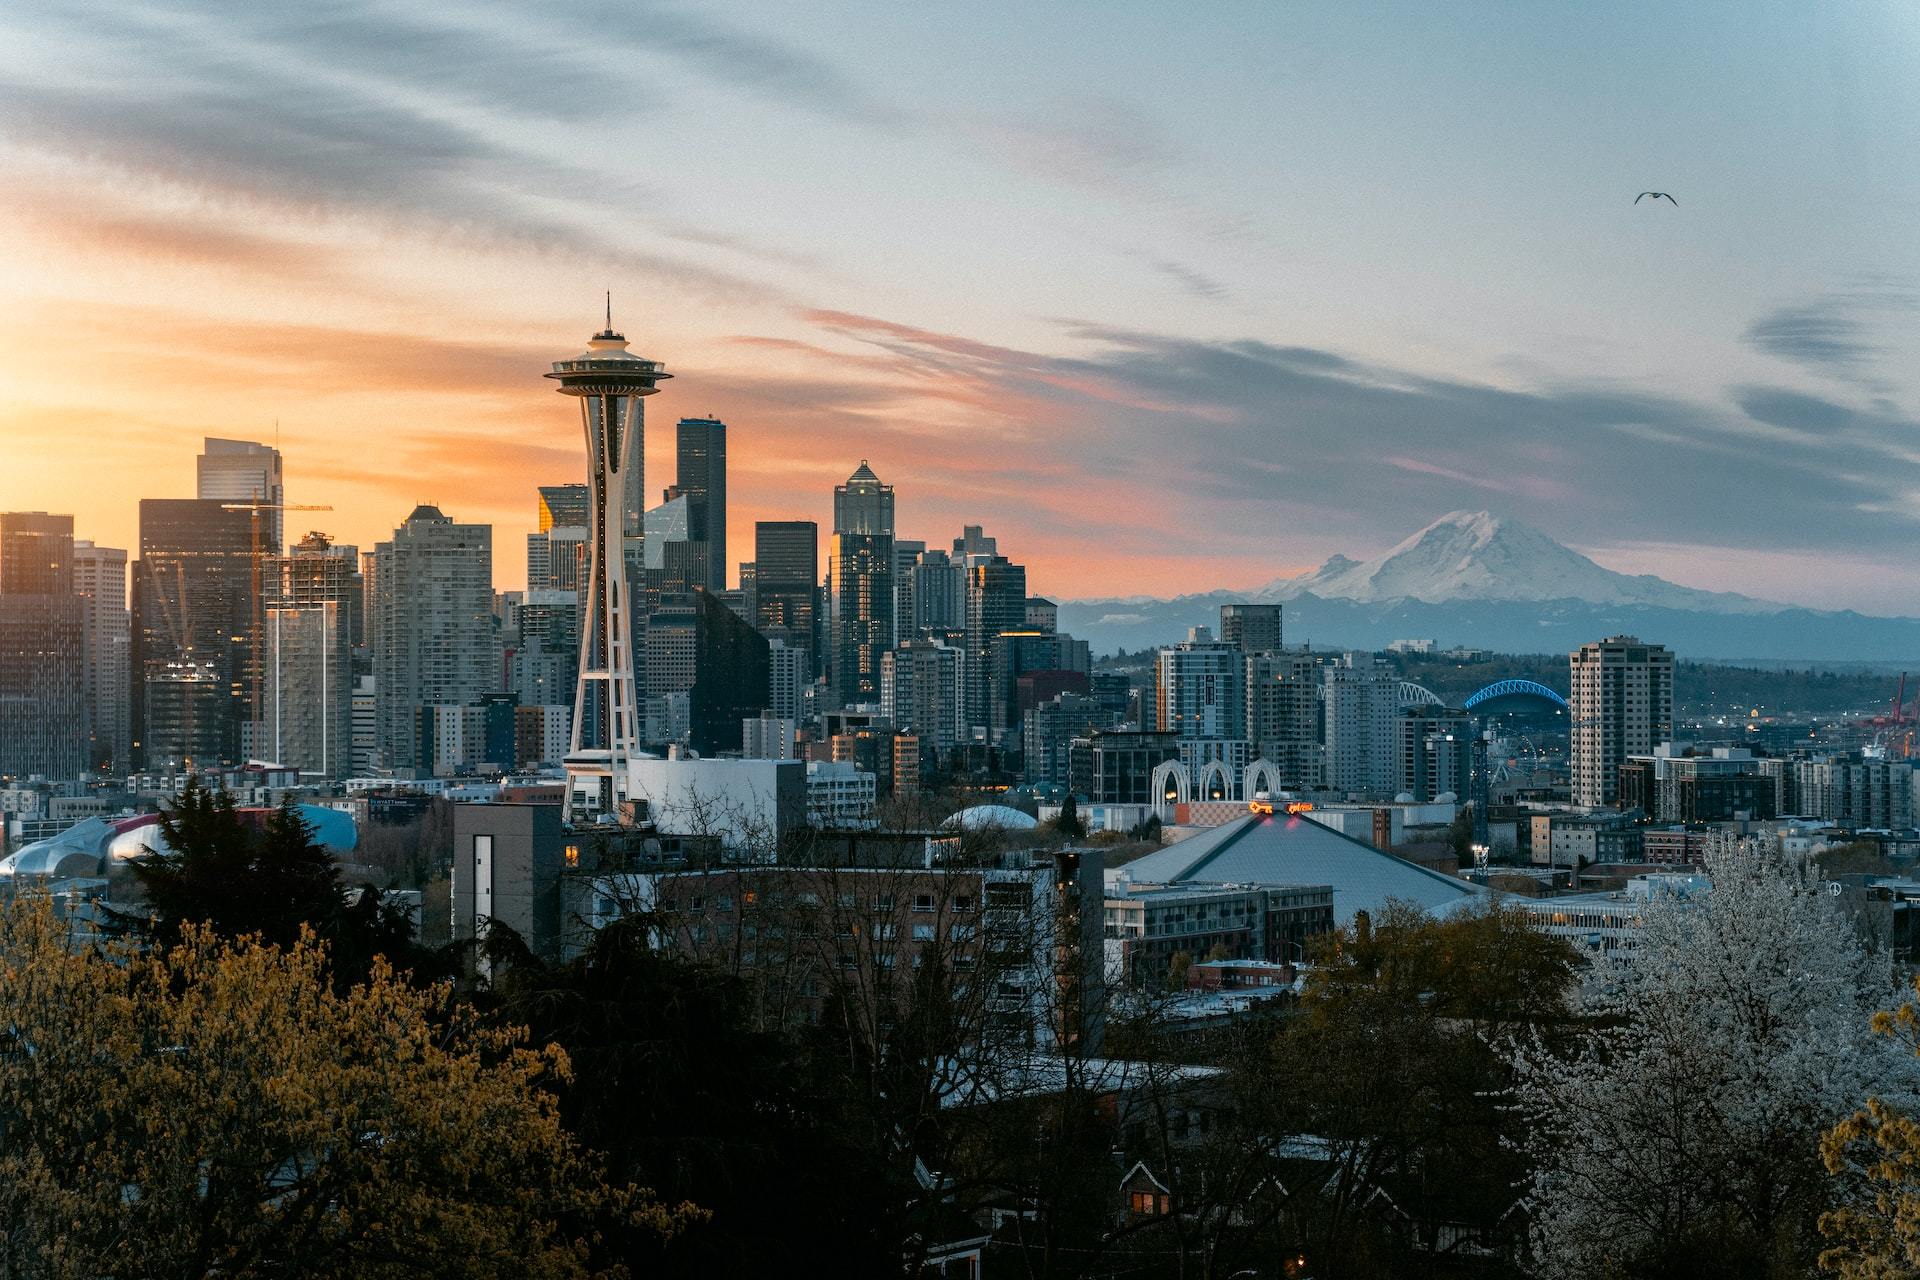 The gorgeous scenery of Seattle's skyline with the white-capped Mount Rainier in the distance.